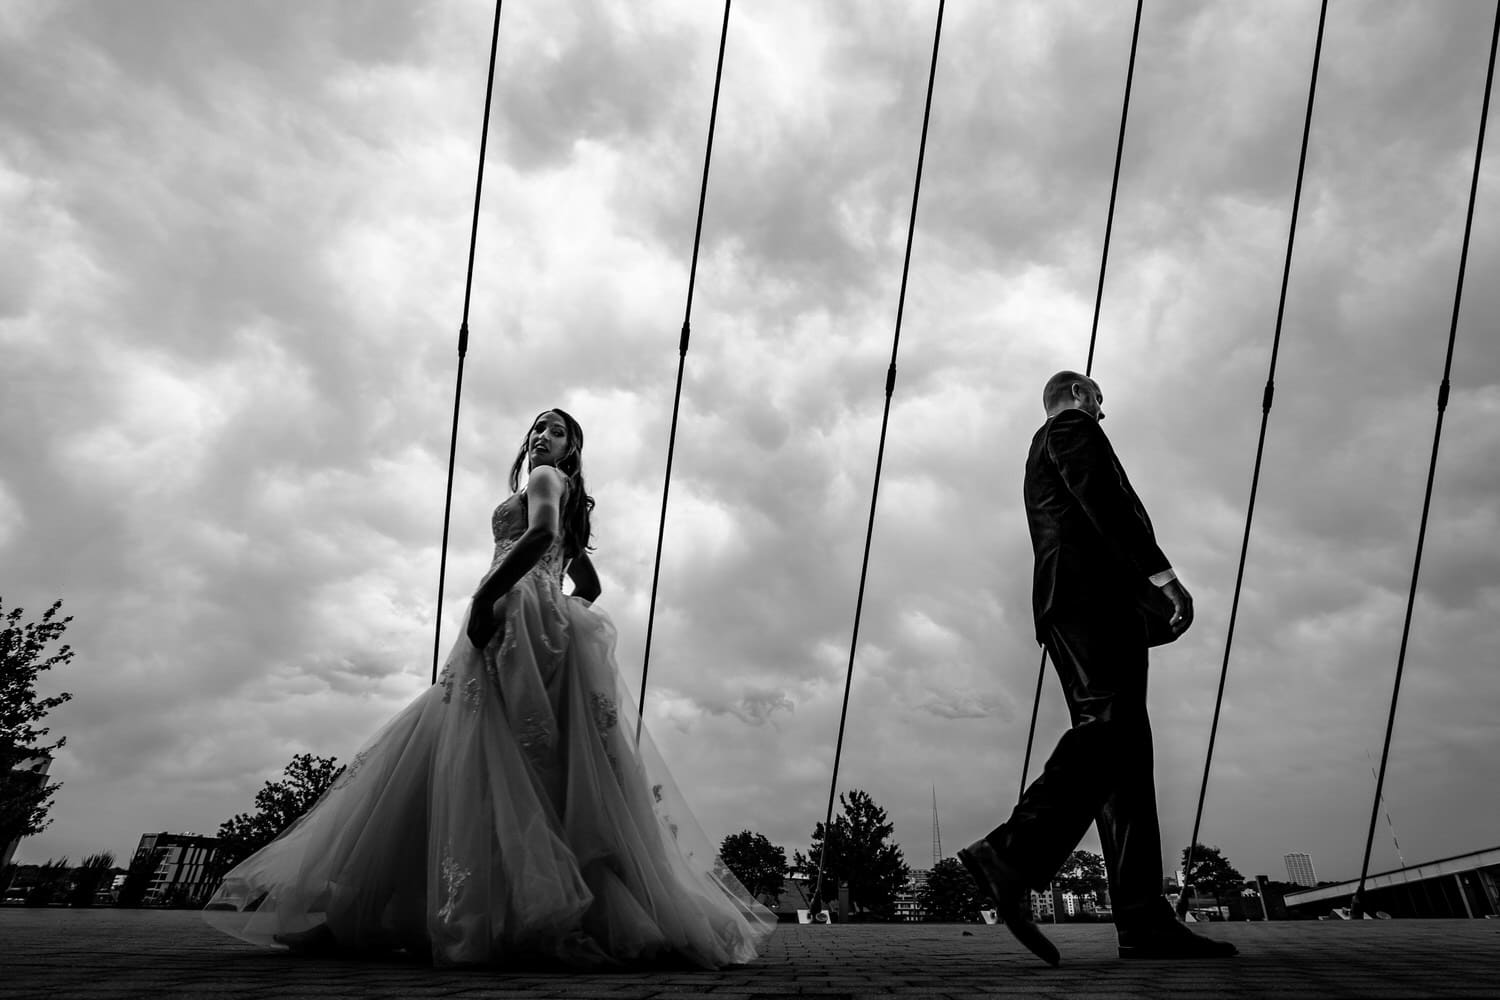 A candid black and white picture of a bride holding her gown, walking away from her groom and looking back over her shoulder; stormy skies visible behind them. 